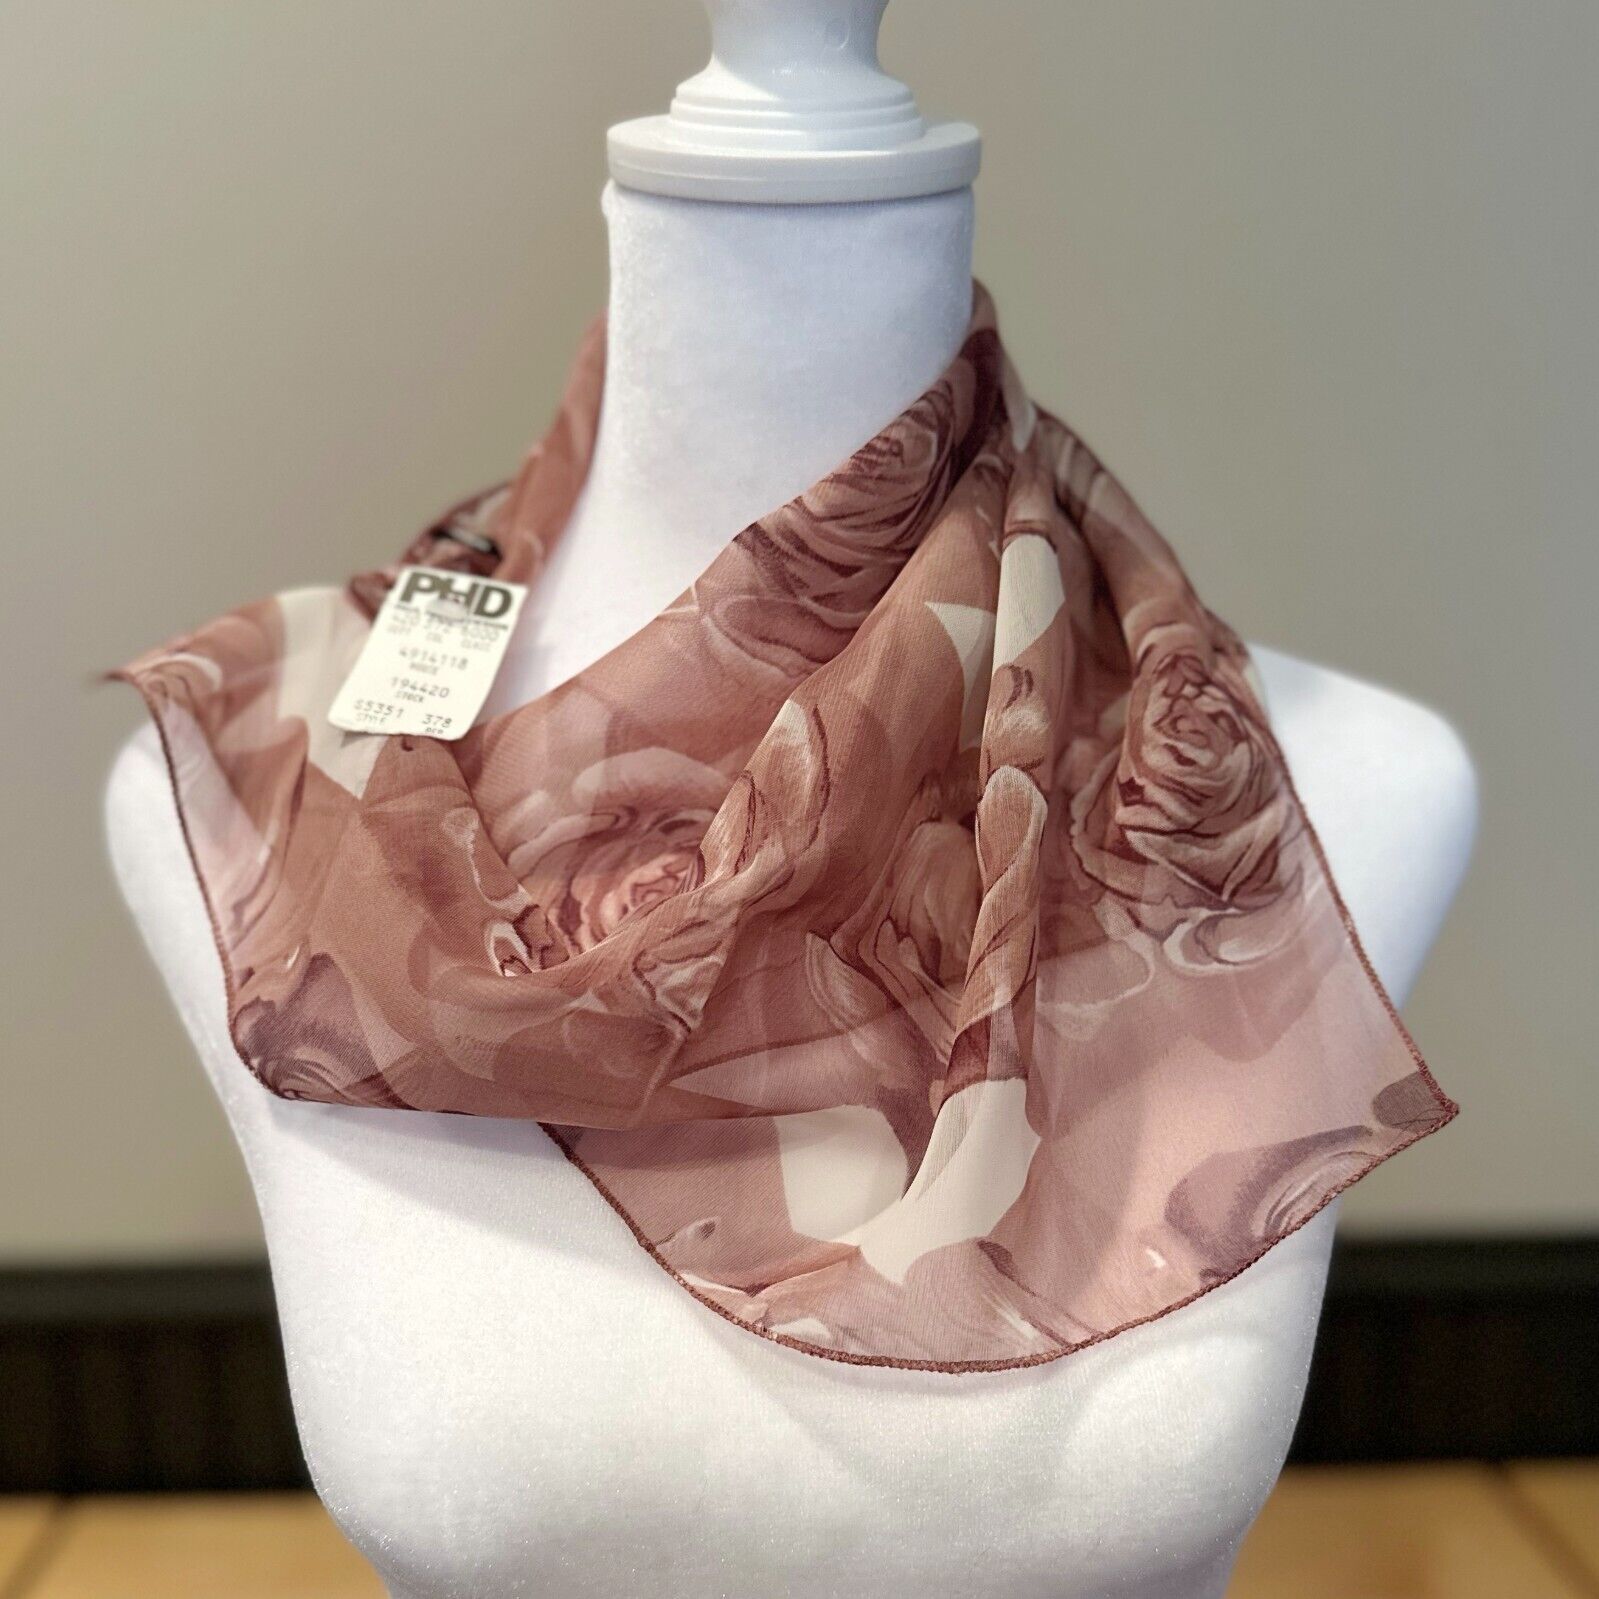 NWT PHD Paul Harris Design Sheer Neck Scarf with Dusty Rose Pink Roses ~ 18x18